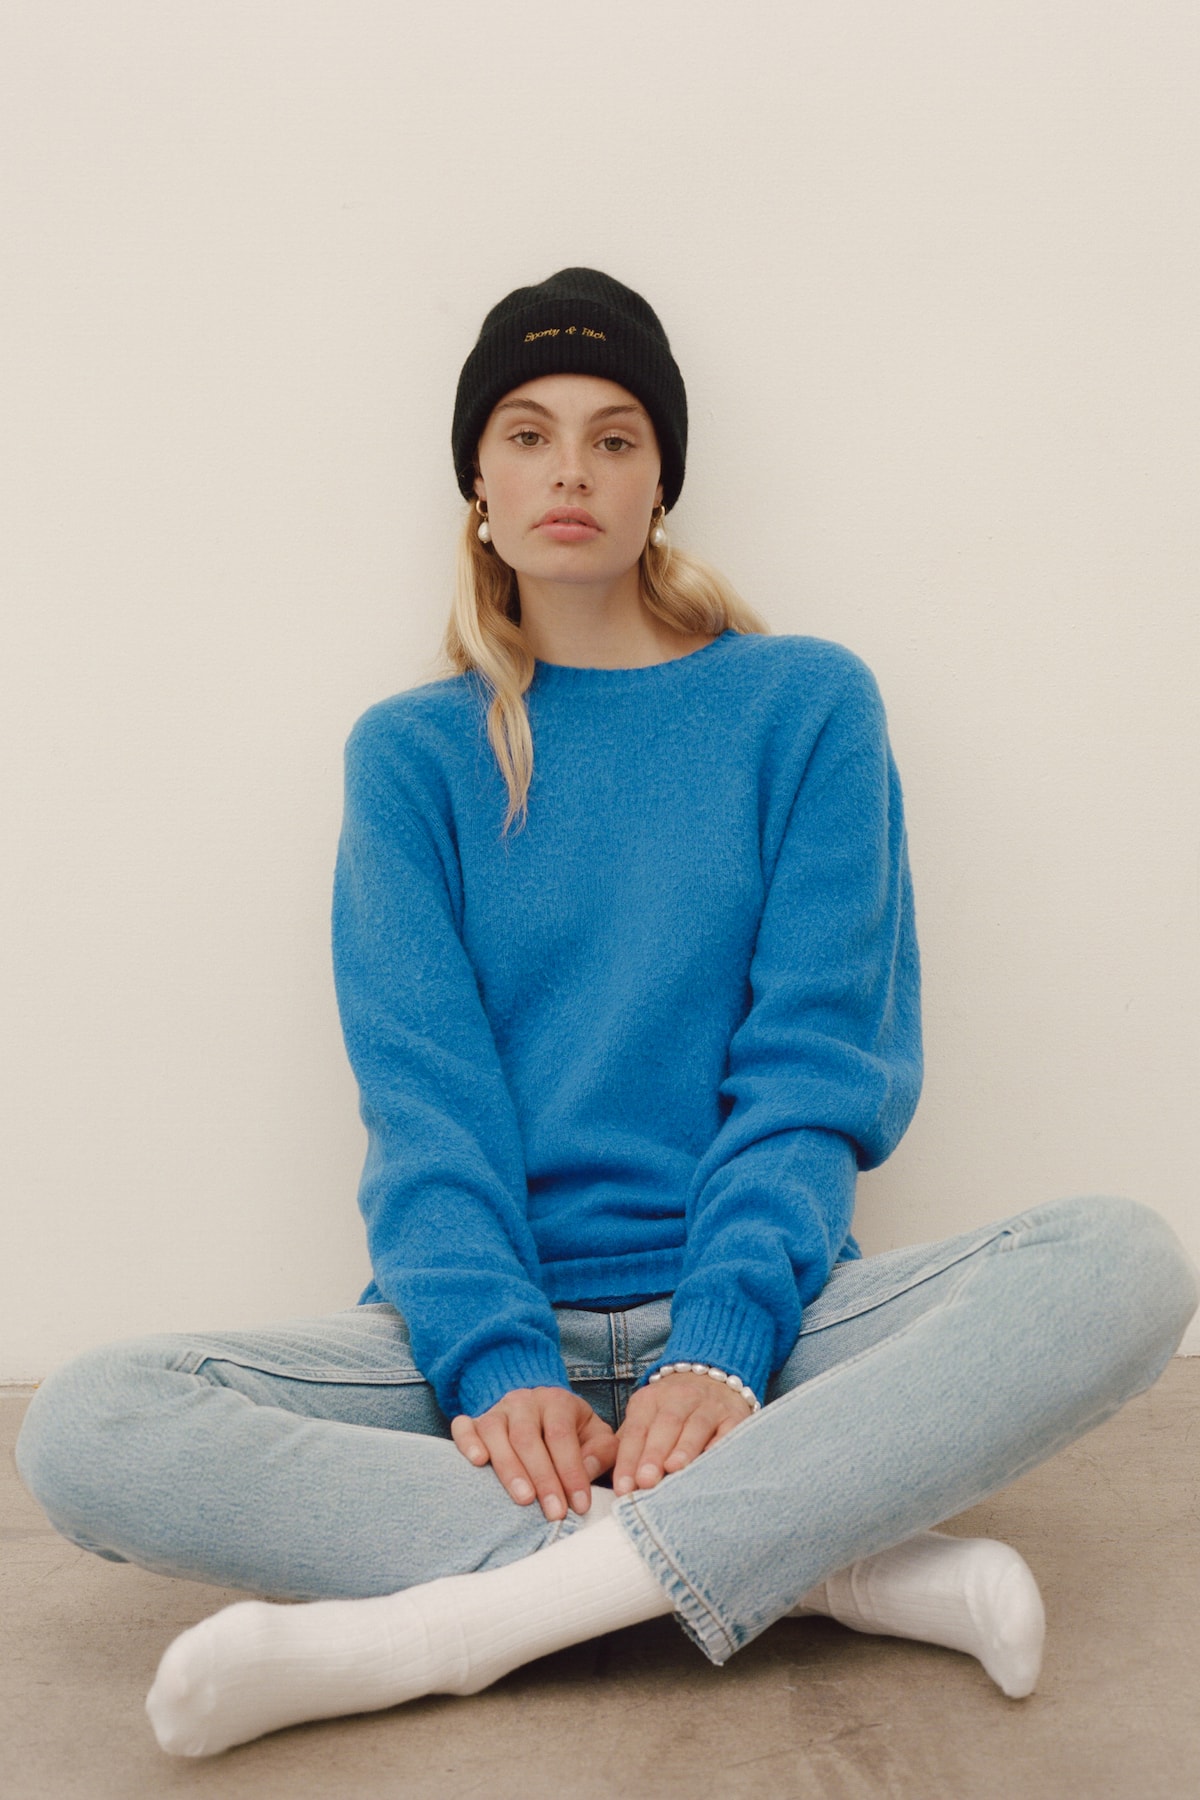 Sporty & Rich x Harmony Emily Oberg Collaboration Lookbook Collection Sweaters Logo Knits Beanie 